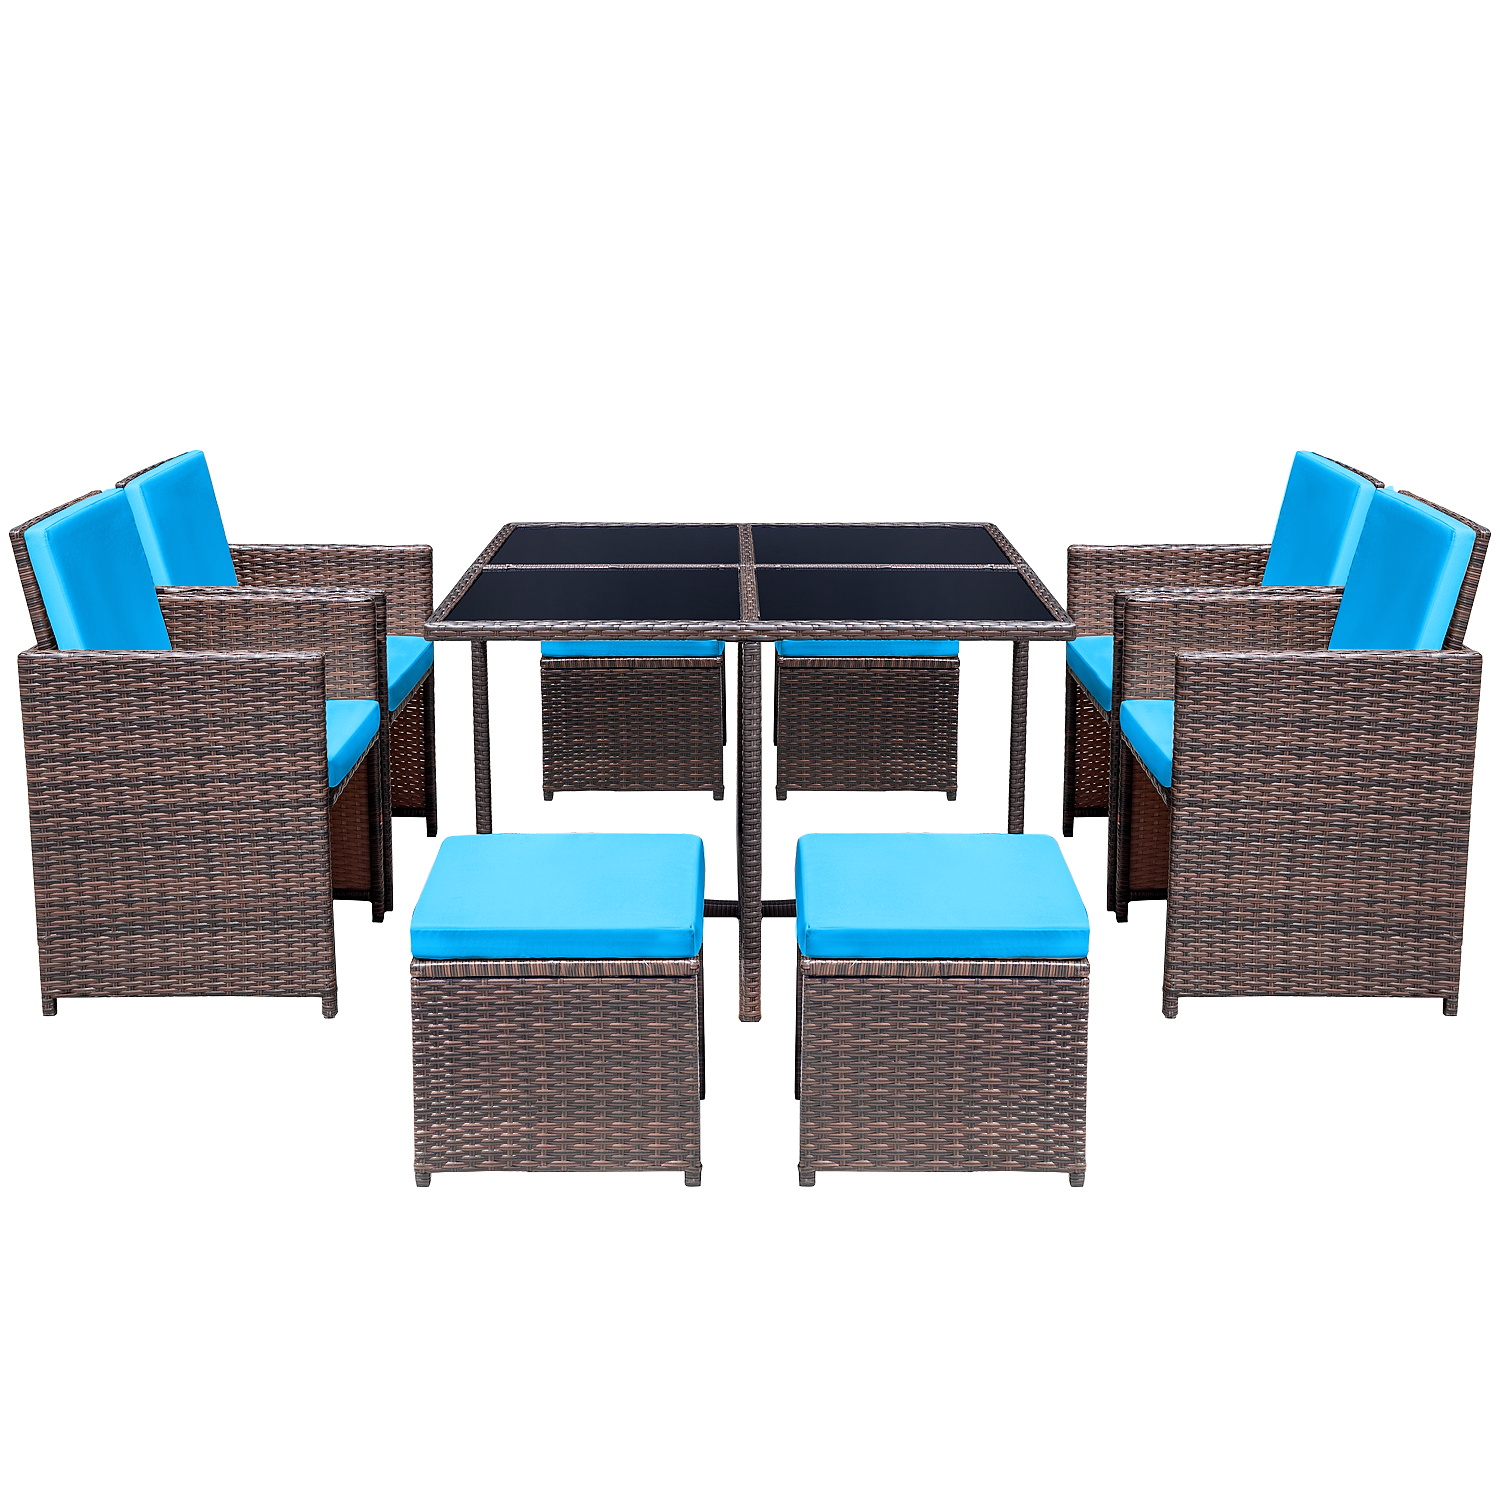 Lacoo 9 Pieces Patio Indoor Dining Sets Outdoor Furniture Patio Wicker Rattan Chairs and Tempered Glass Table Sectional Set Conversation Set Cushioned with Ottoman, Blue, 8 - image 2 of 7